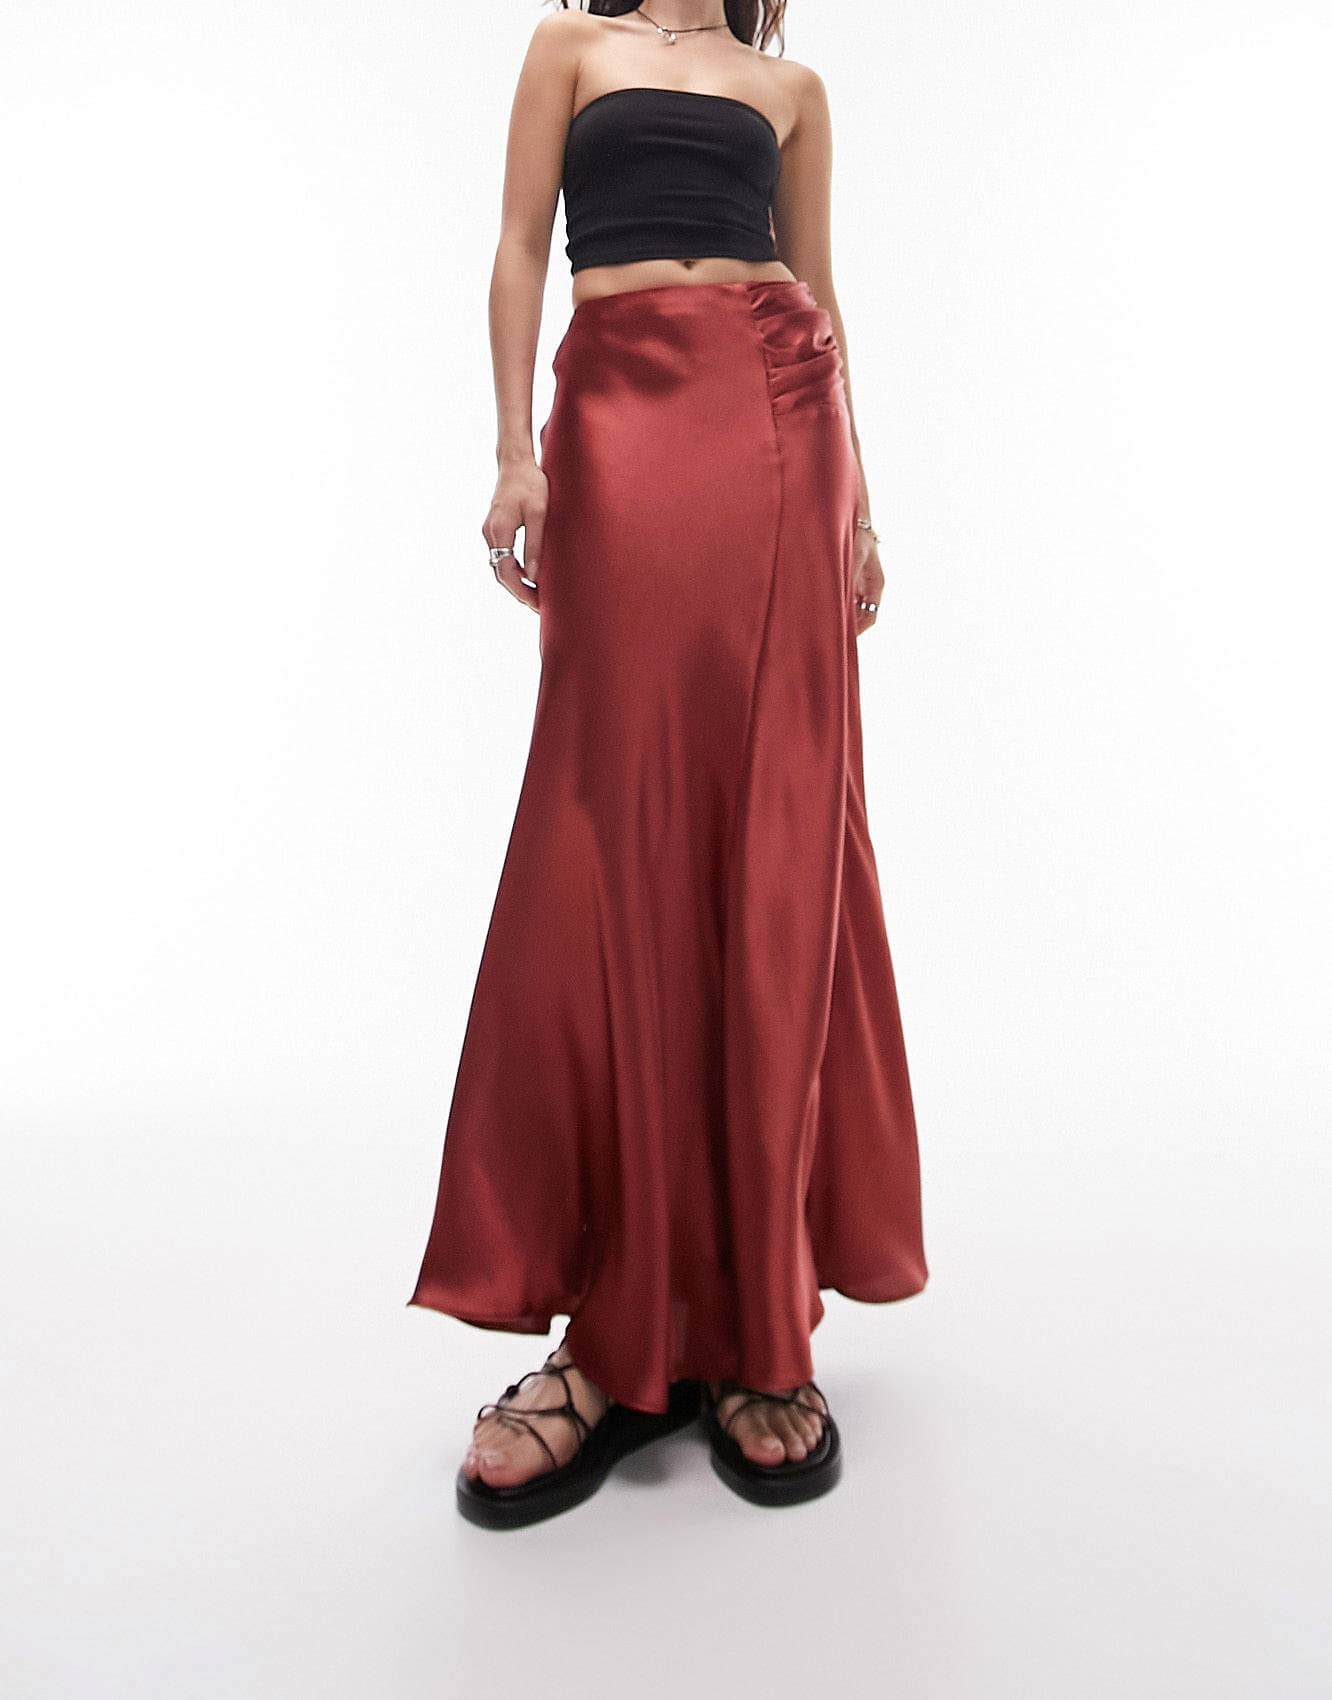 Юбка Topshop Asymmetric Maxi With Ruched Panel, красный юбка topshop asymmetric maxi with ruched panel красный